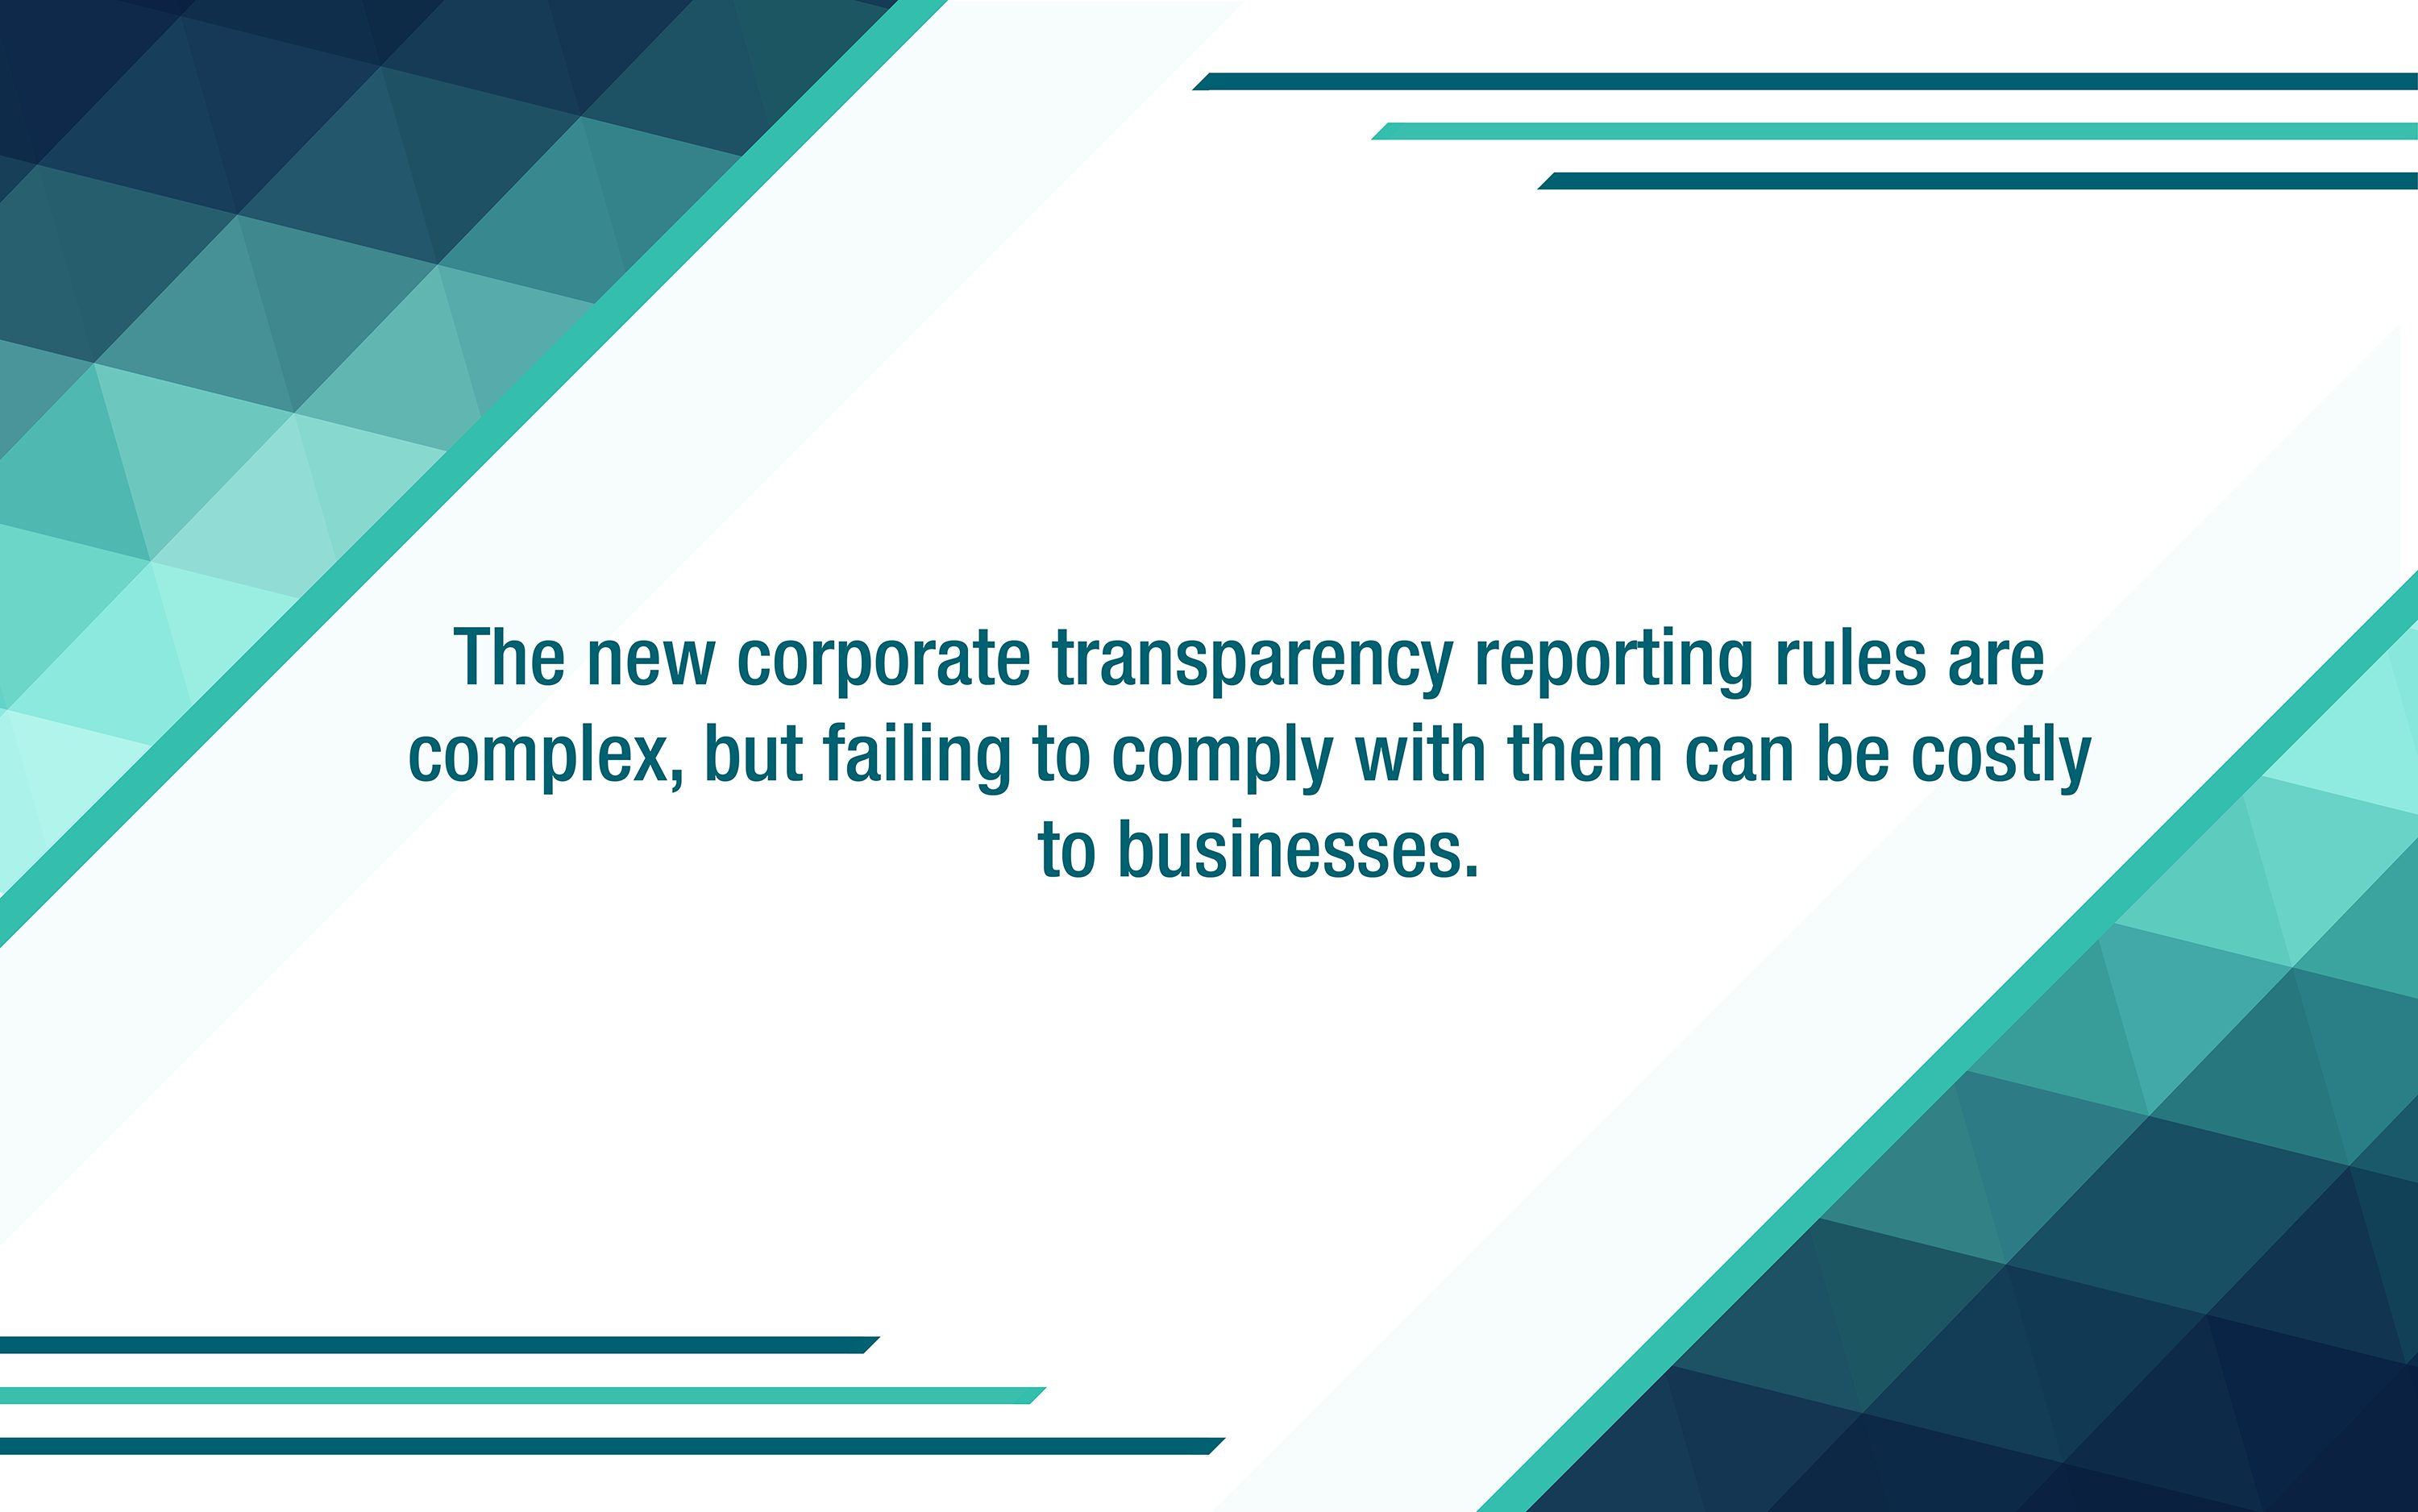 Businesses: Do you have to comply with the new corporate transparency reporting rules?